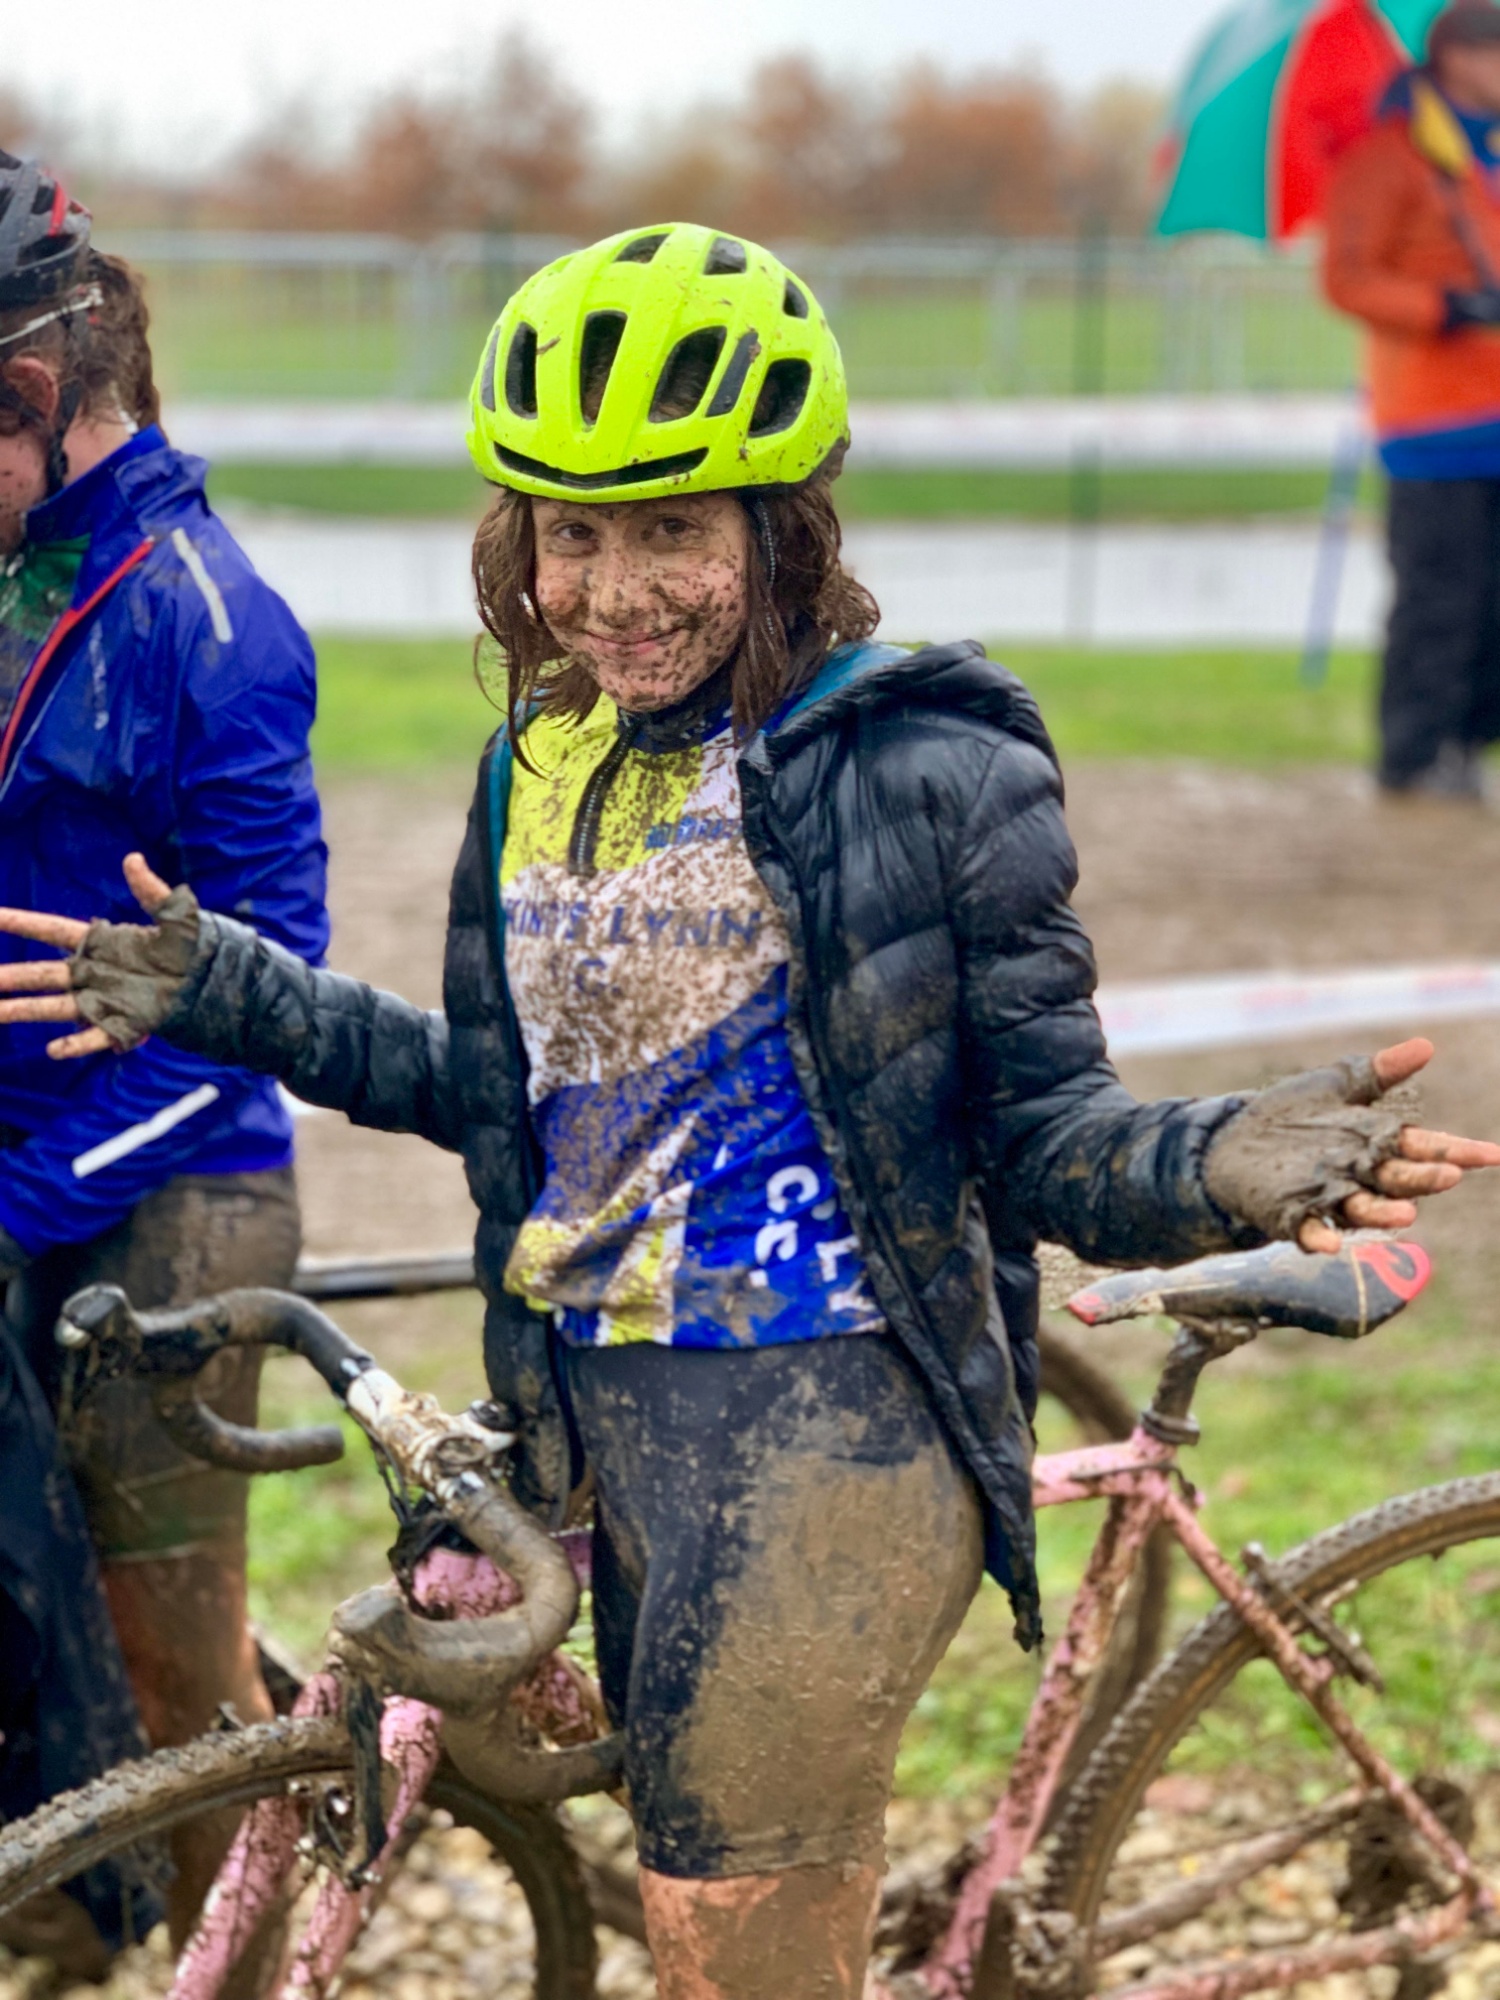 Florence after her race covered in mud